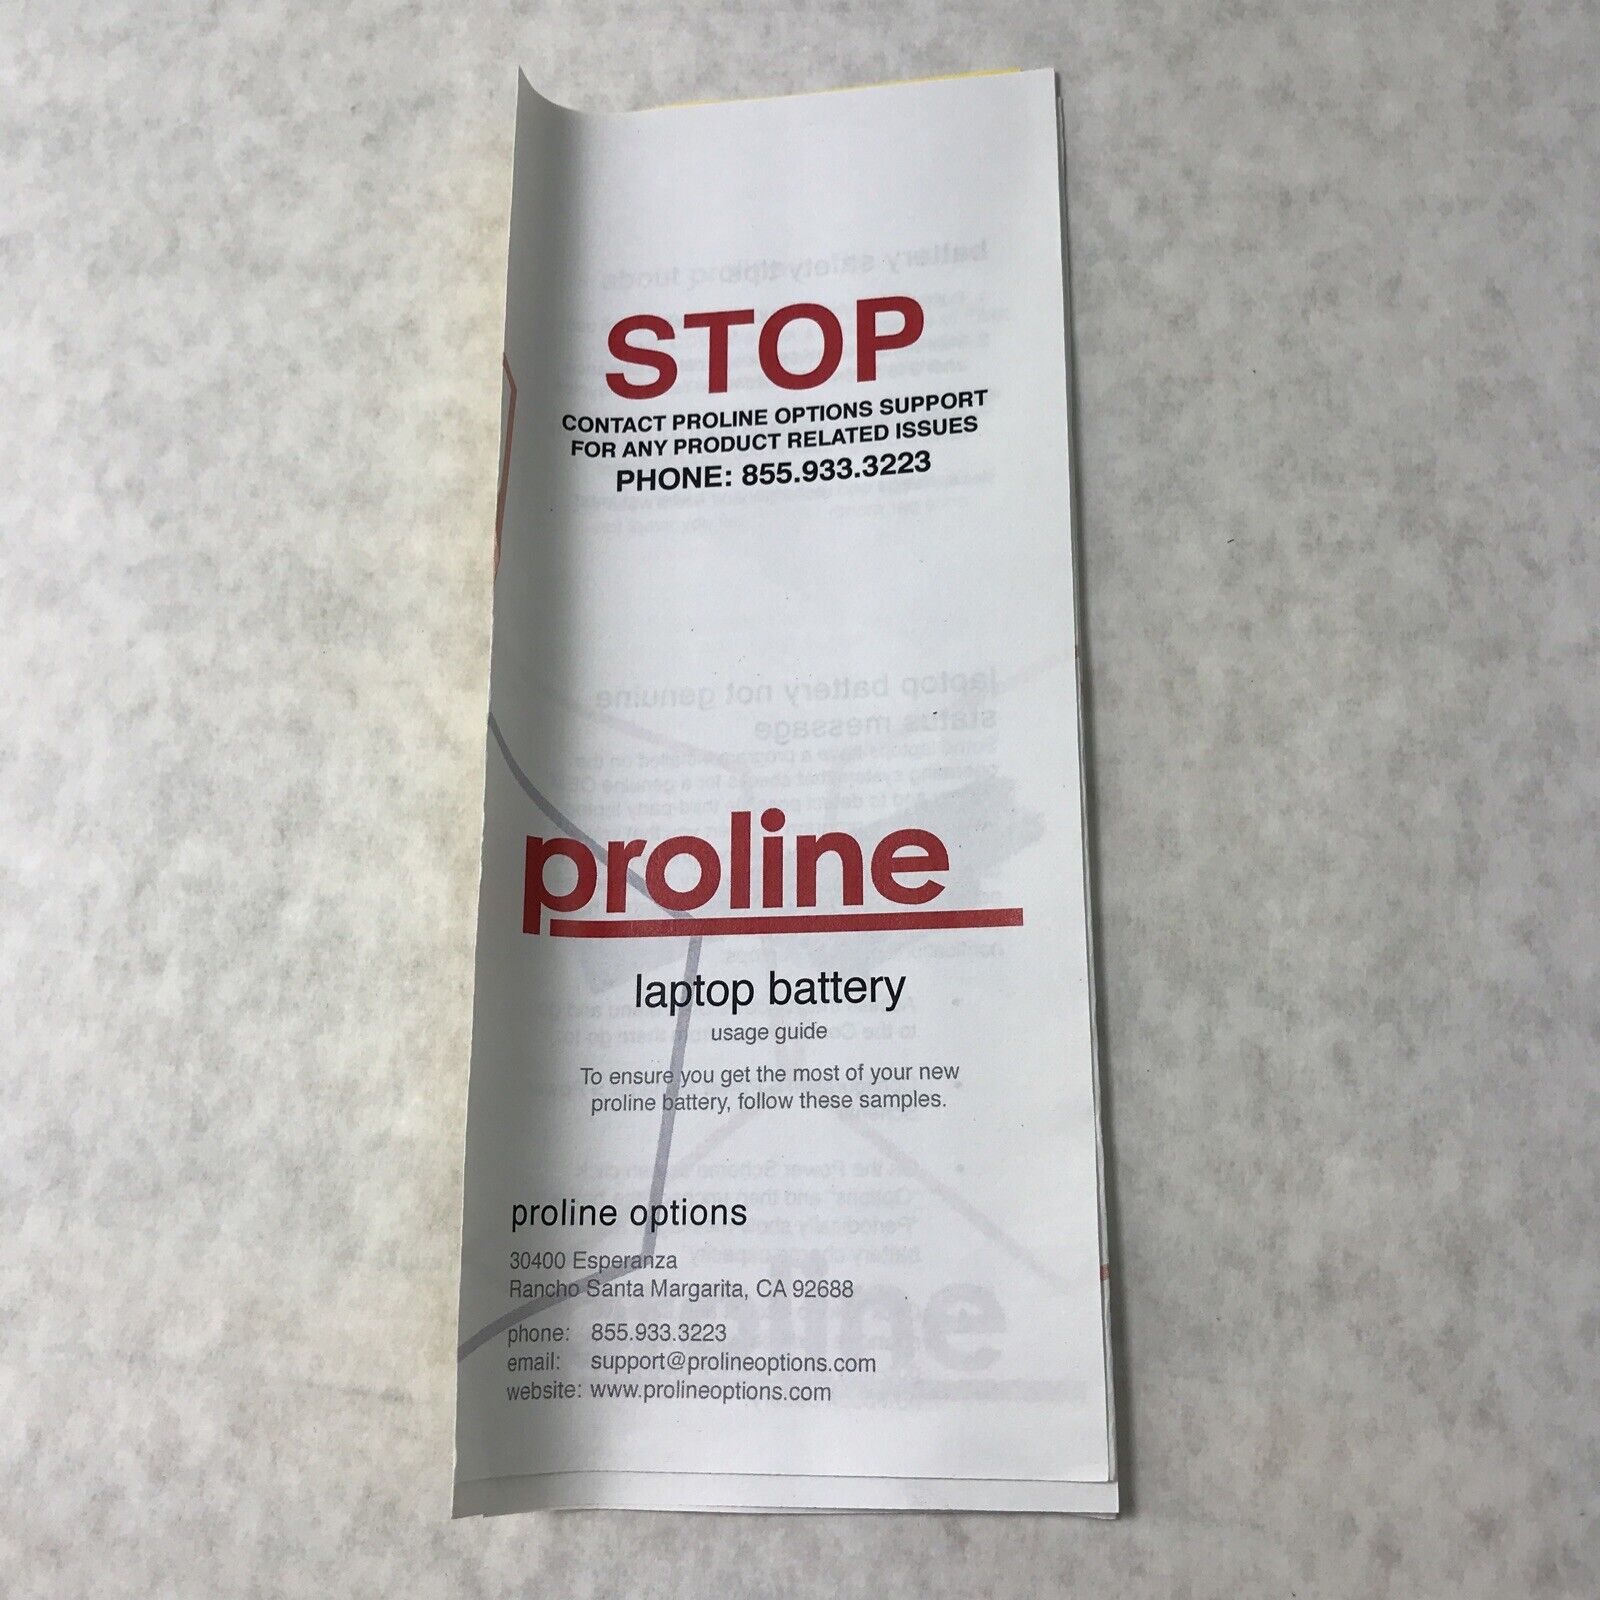 (Lot of 3) ThinkProline 312-1163-PRO 9 Cell Battery for Dell Latitude (BRAND NEW